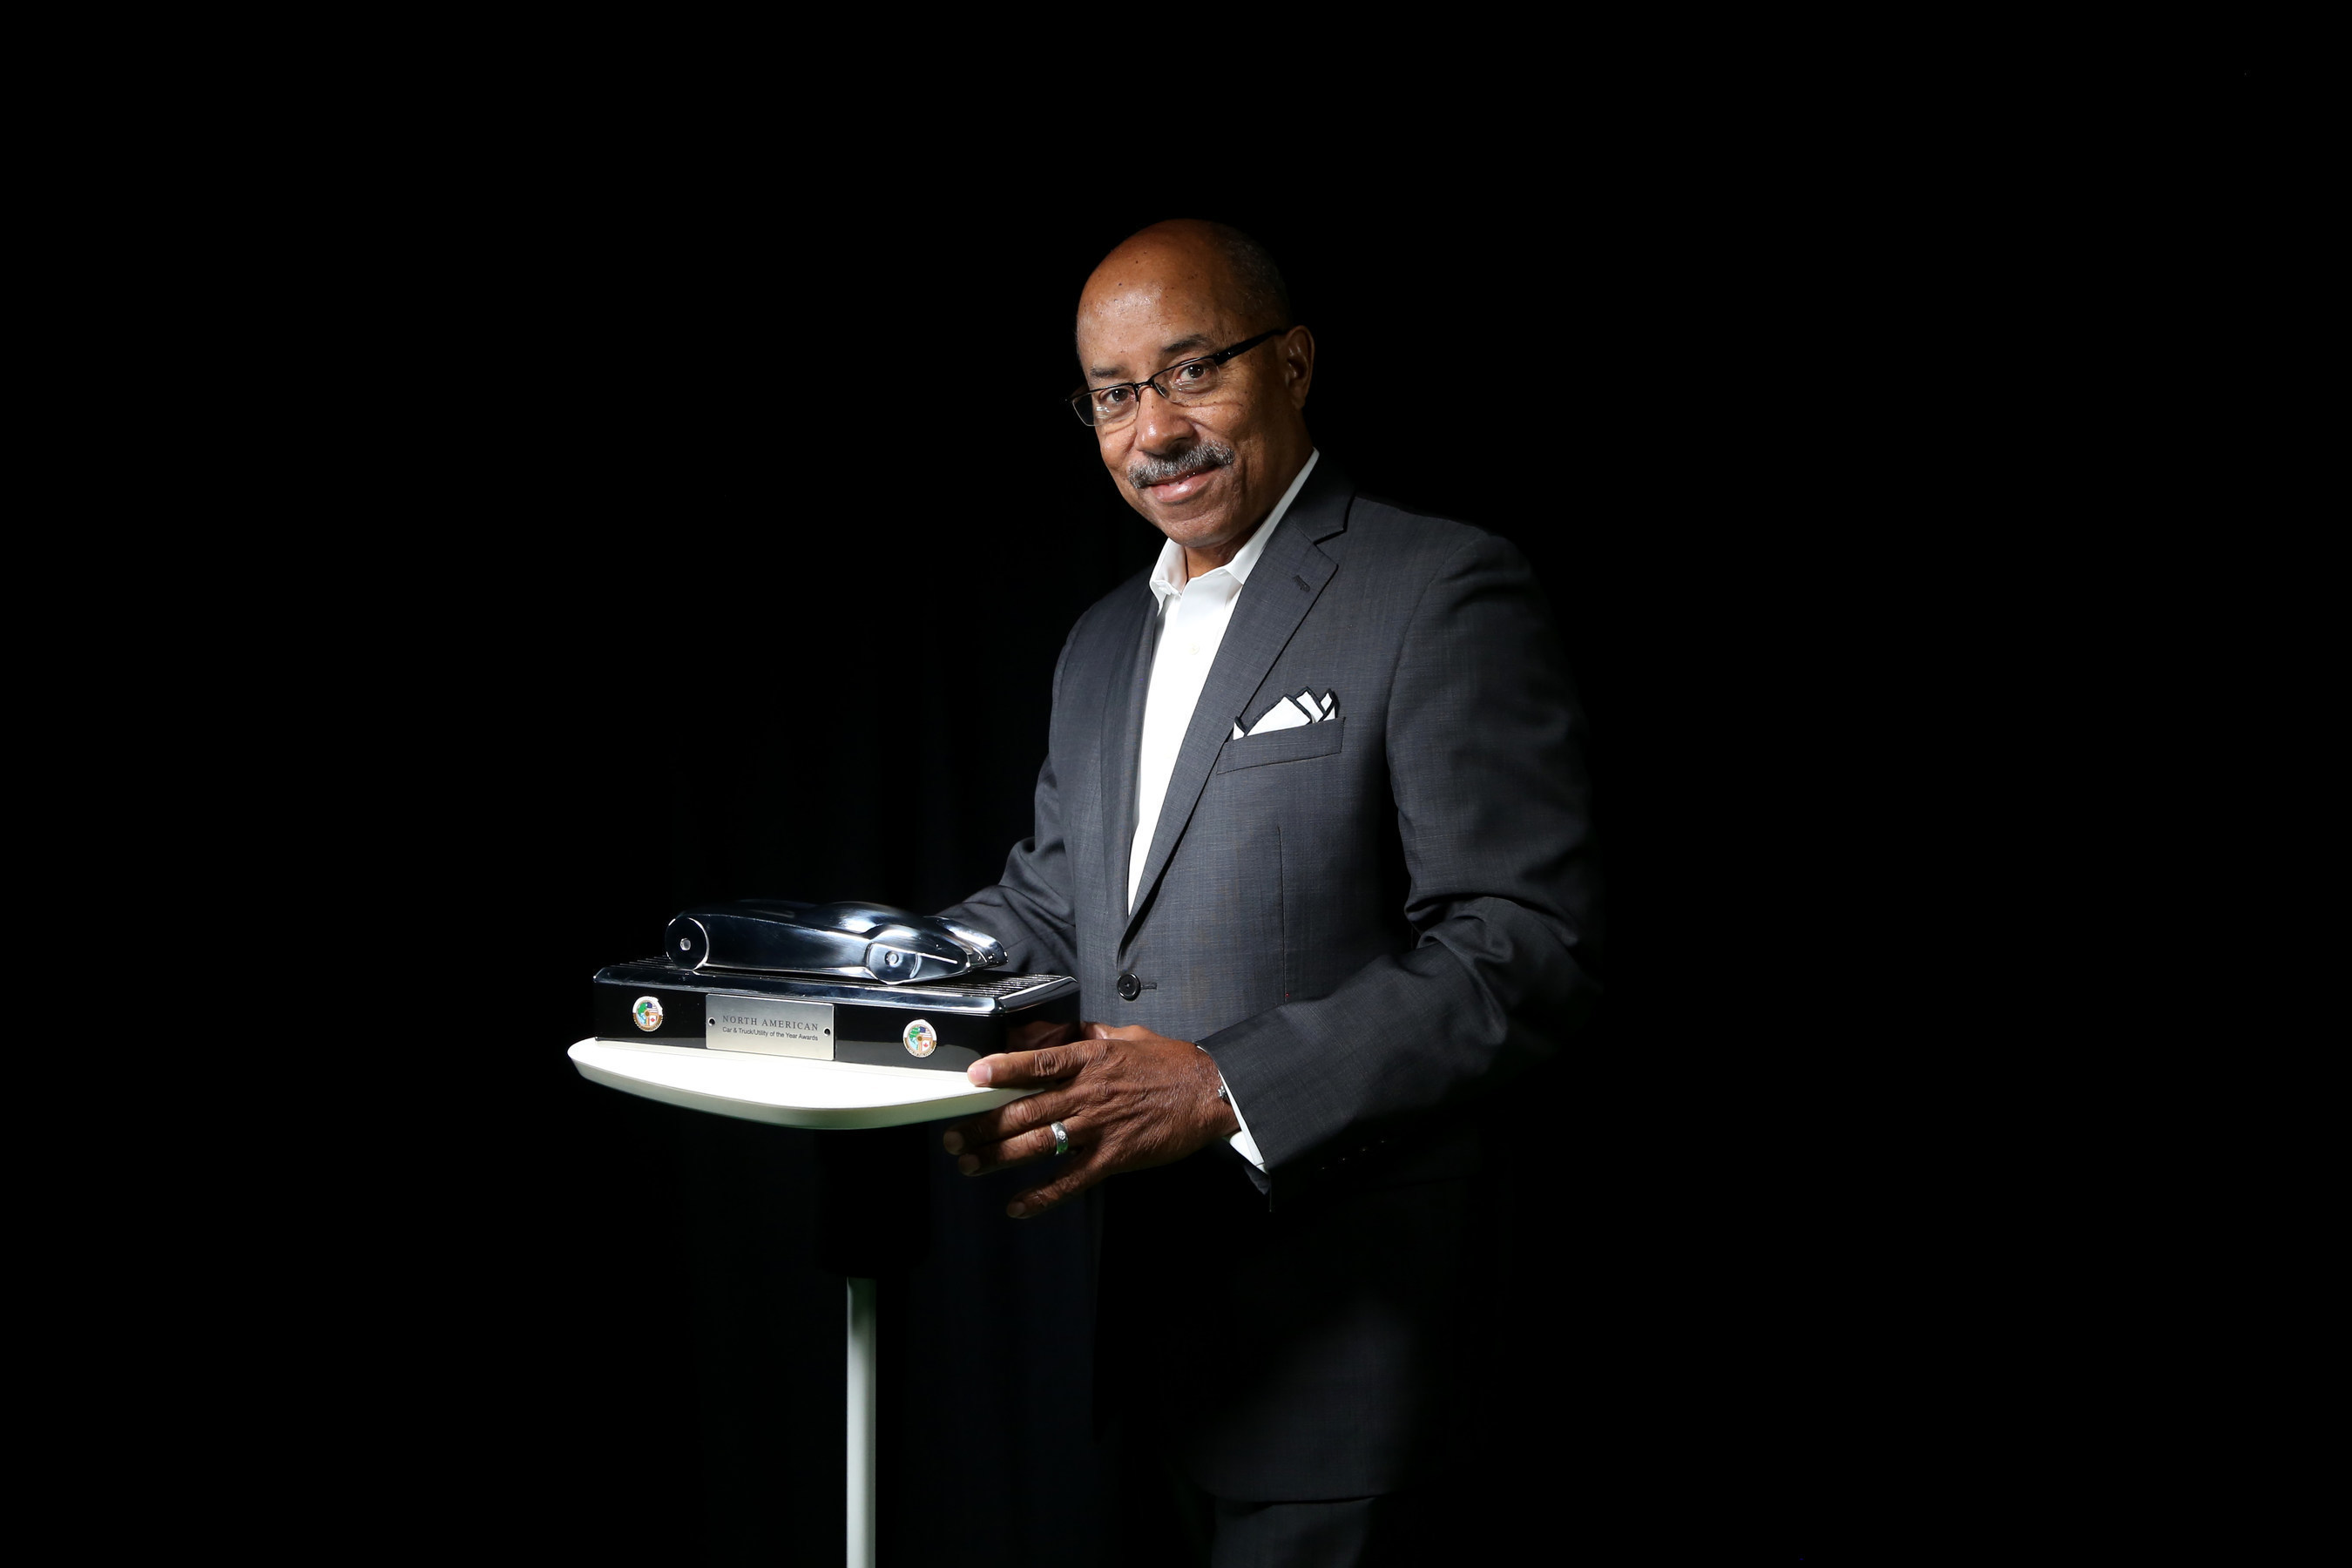 Famed auto designer Ed Welburn with the trophy he created for the North American Car of the Year awards.